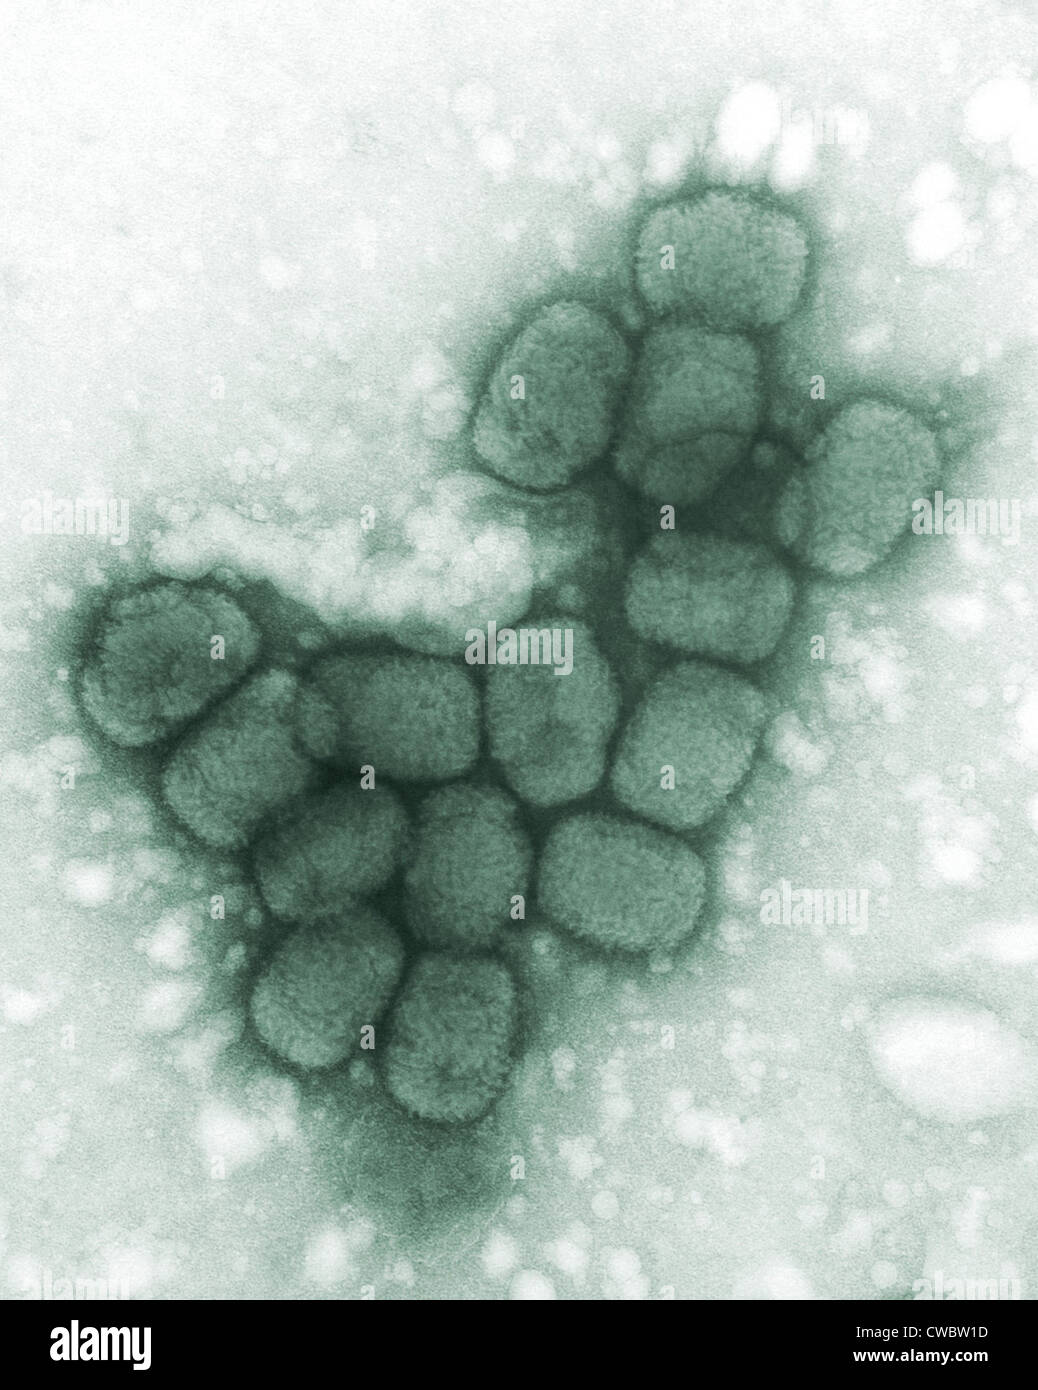 Smallpox viruses. A colorized transmission electron micrograph. 1975. Stock Photo